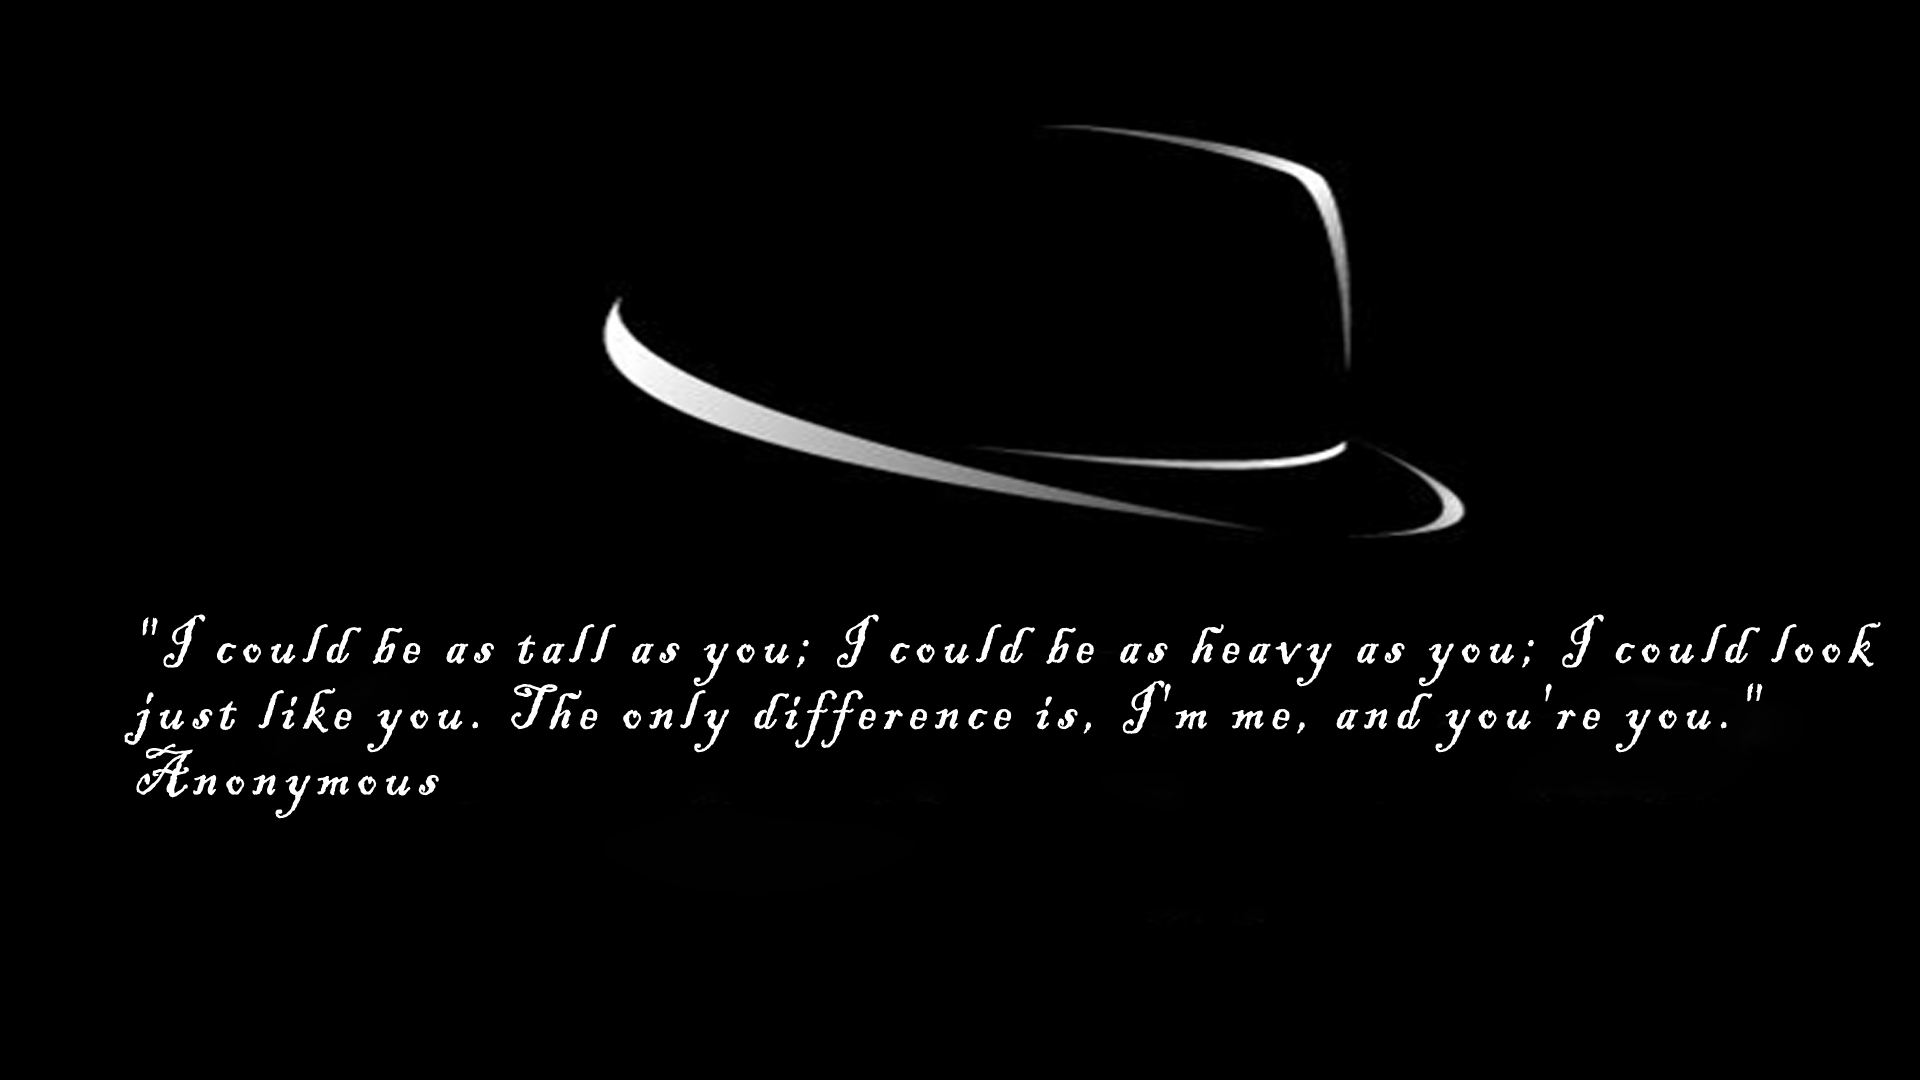 Computer Wallpaper on Anonymous Quotes Category General This Free Desktop Wallpaper Has Been